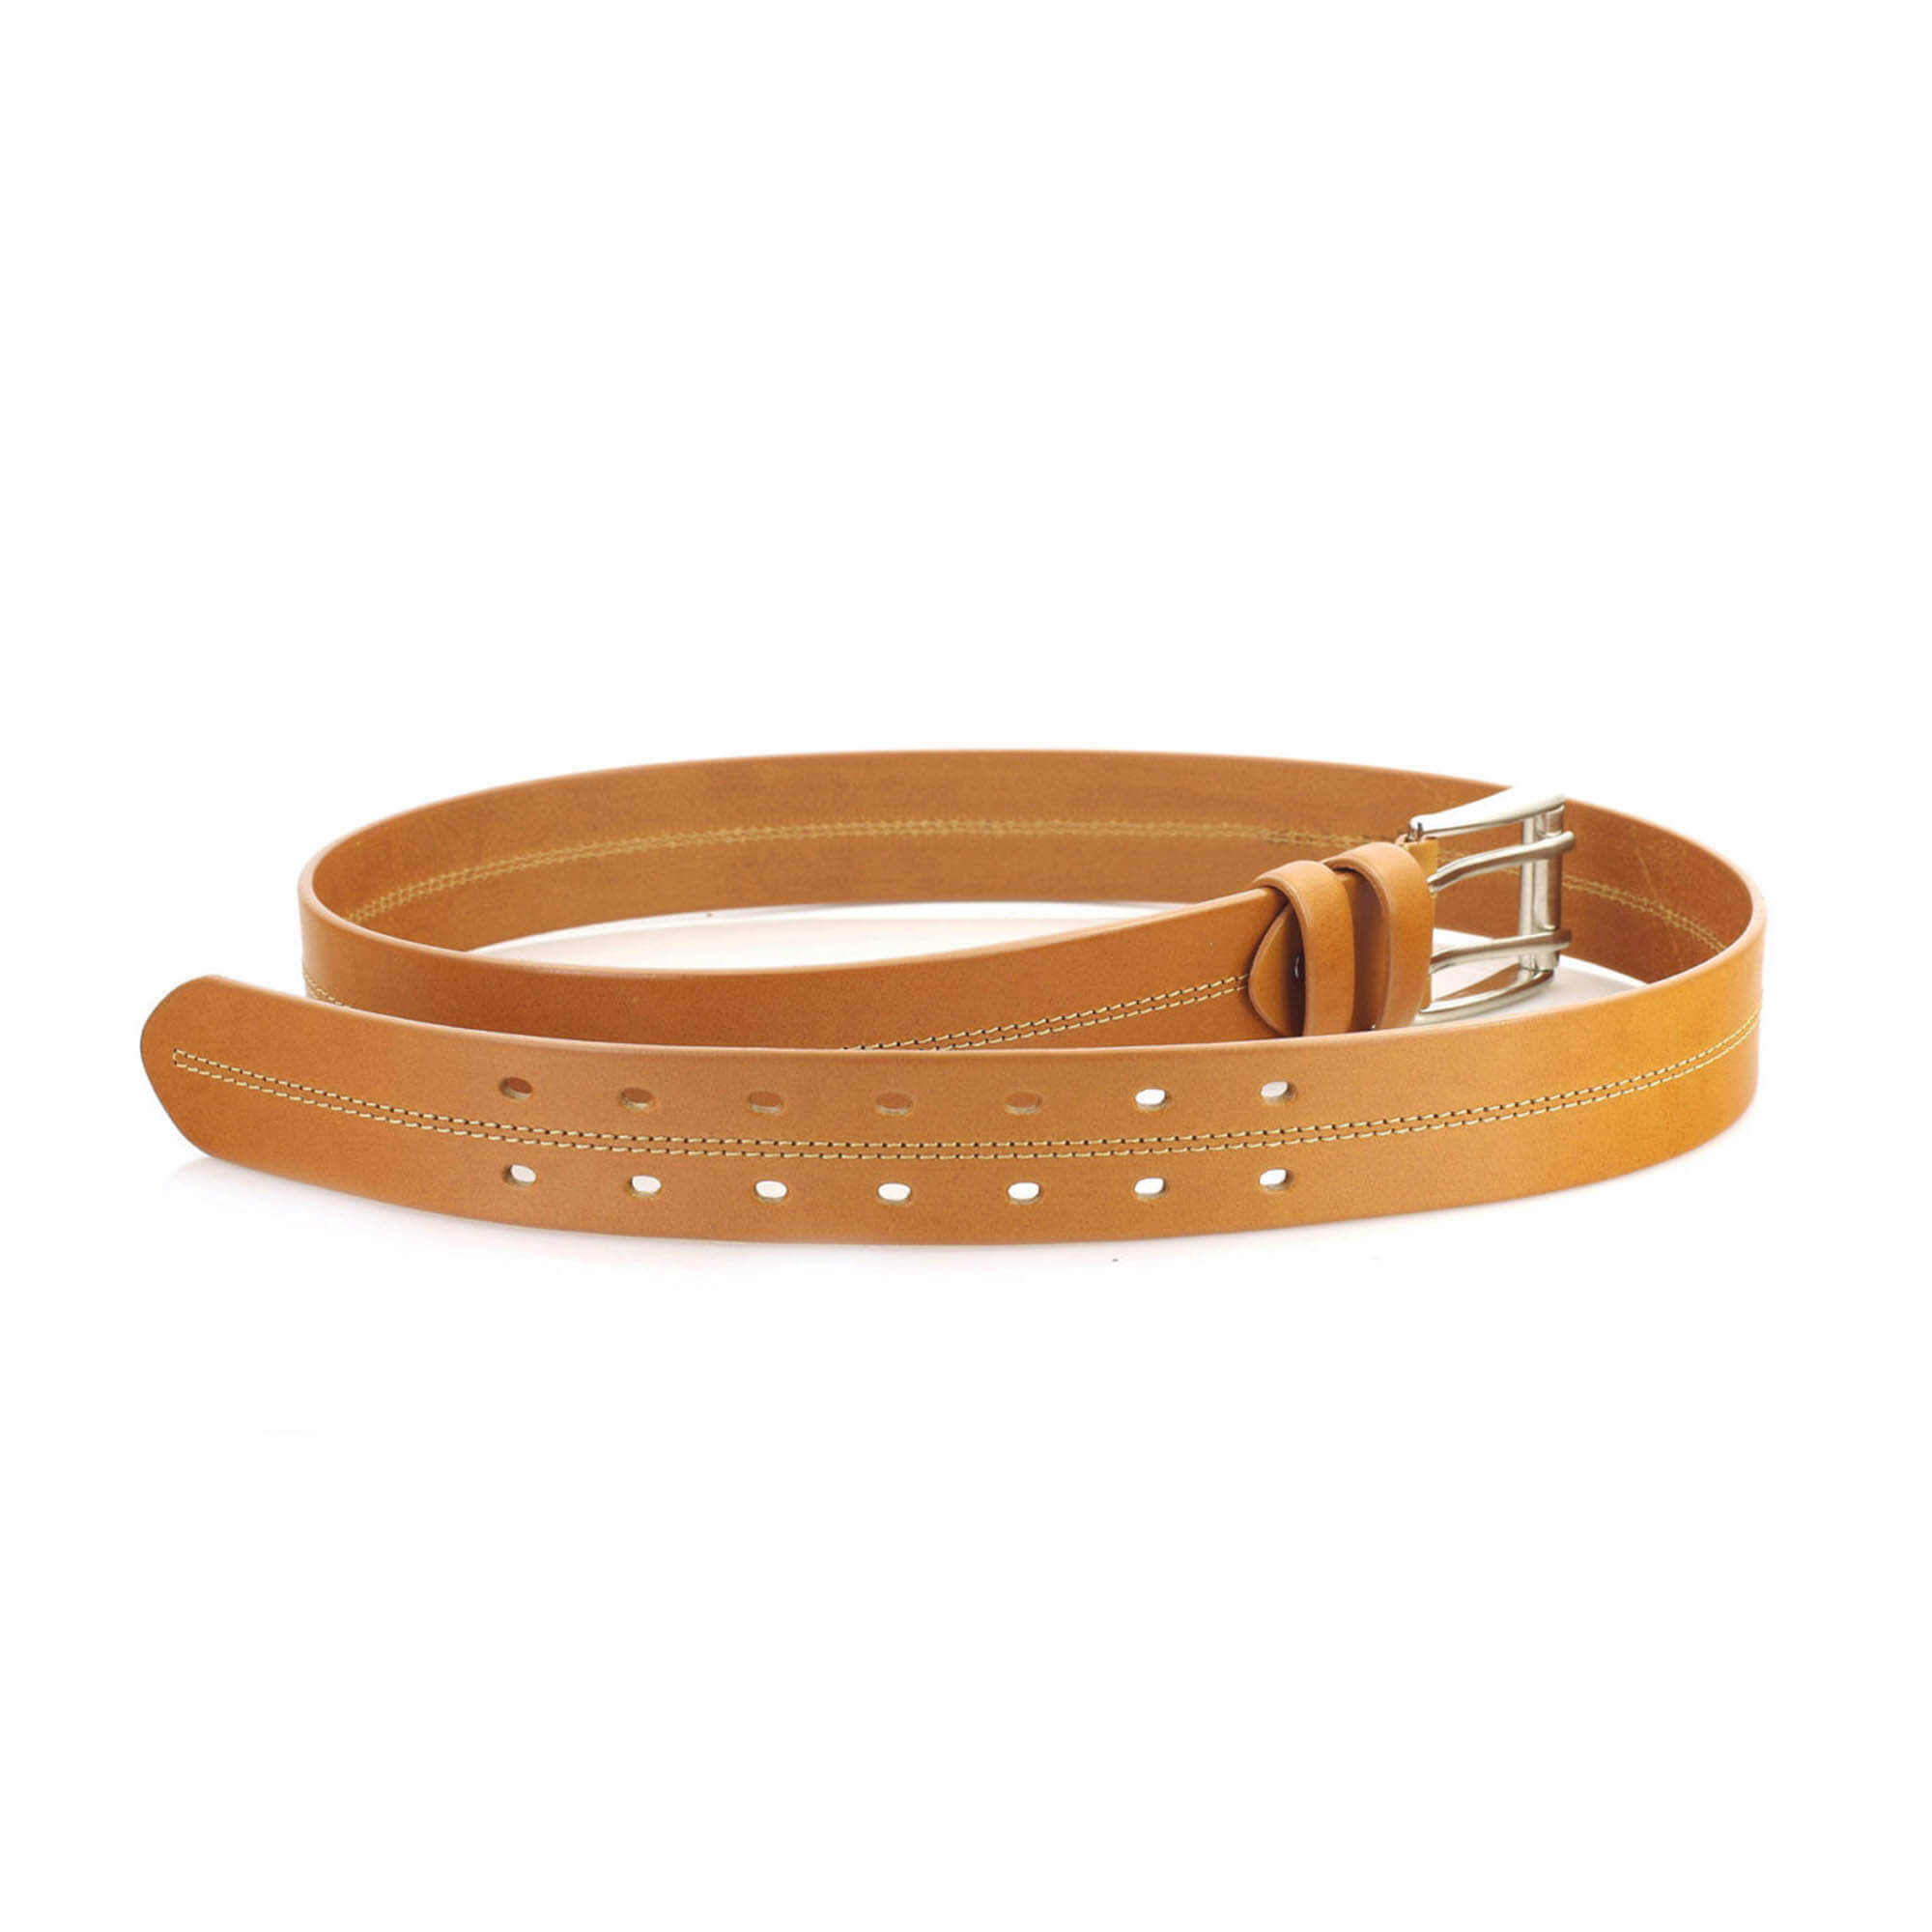 Buy Light Brown Two Hole Belt For Jeans - Double Prong Heavy